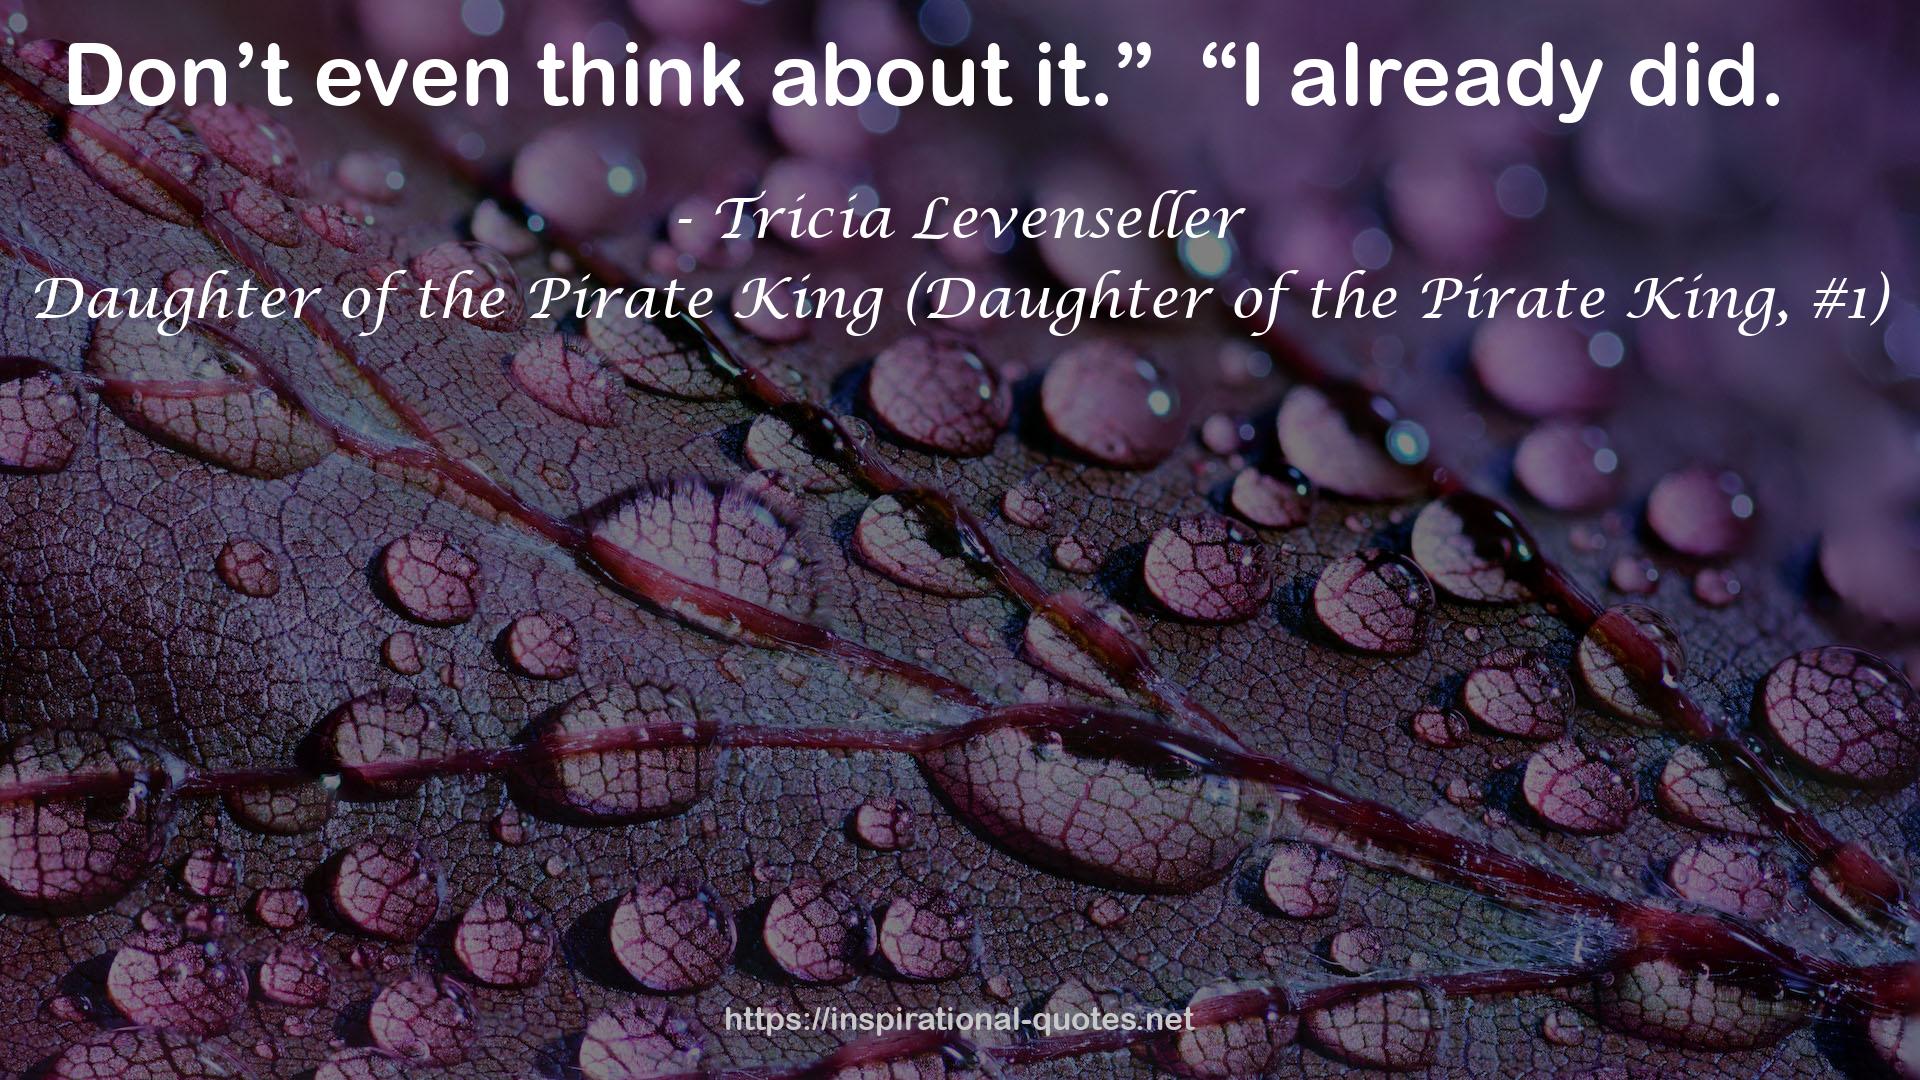 Daughter of the Pirate King (Daughter of the Pirate King, #1) QUOTES